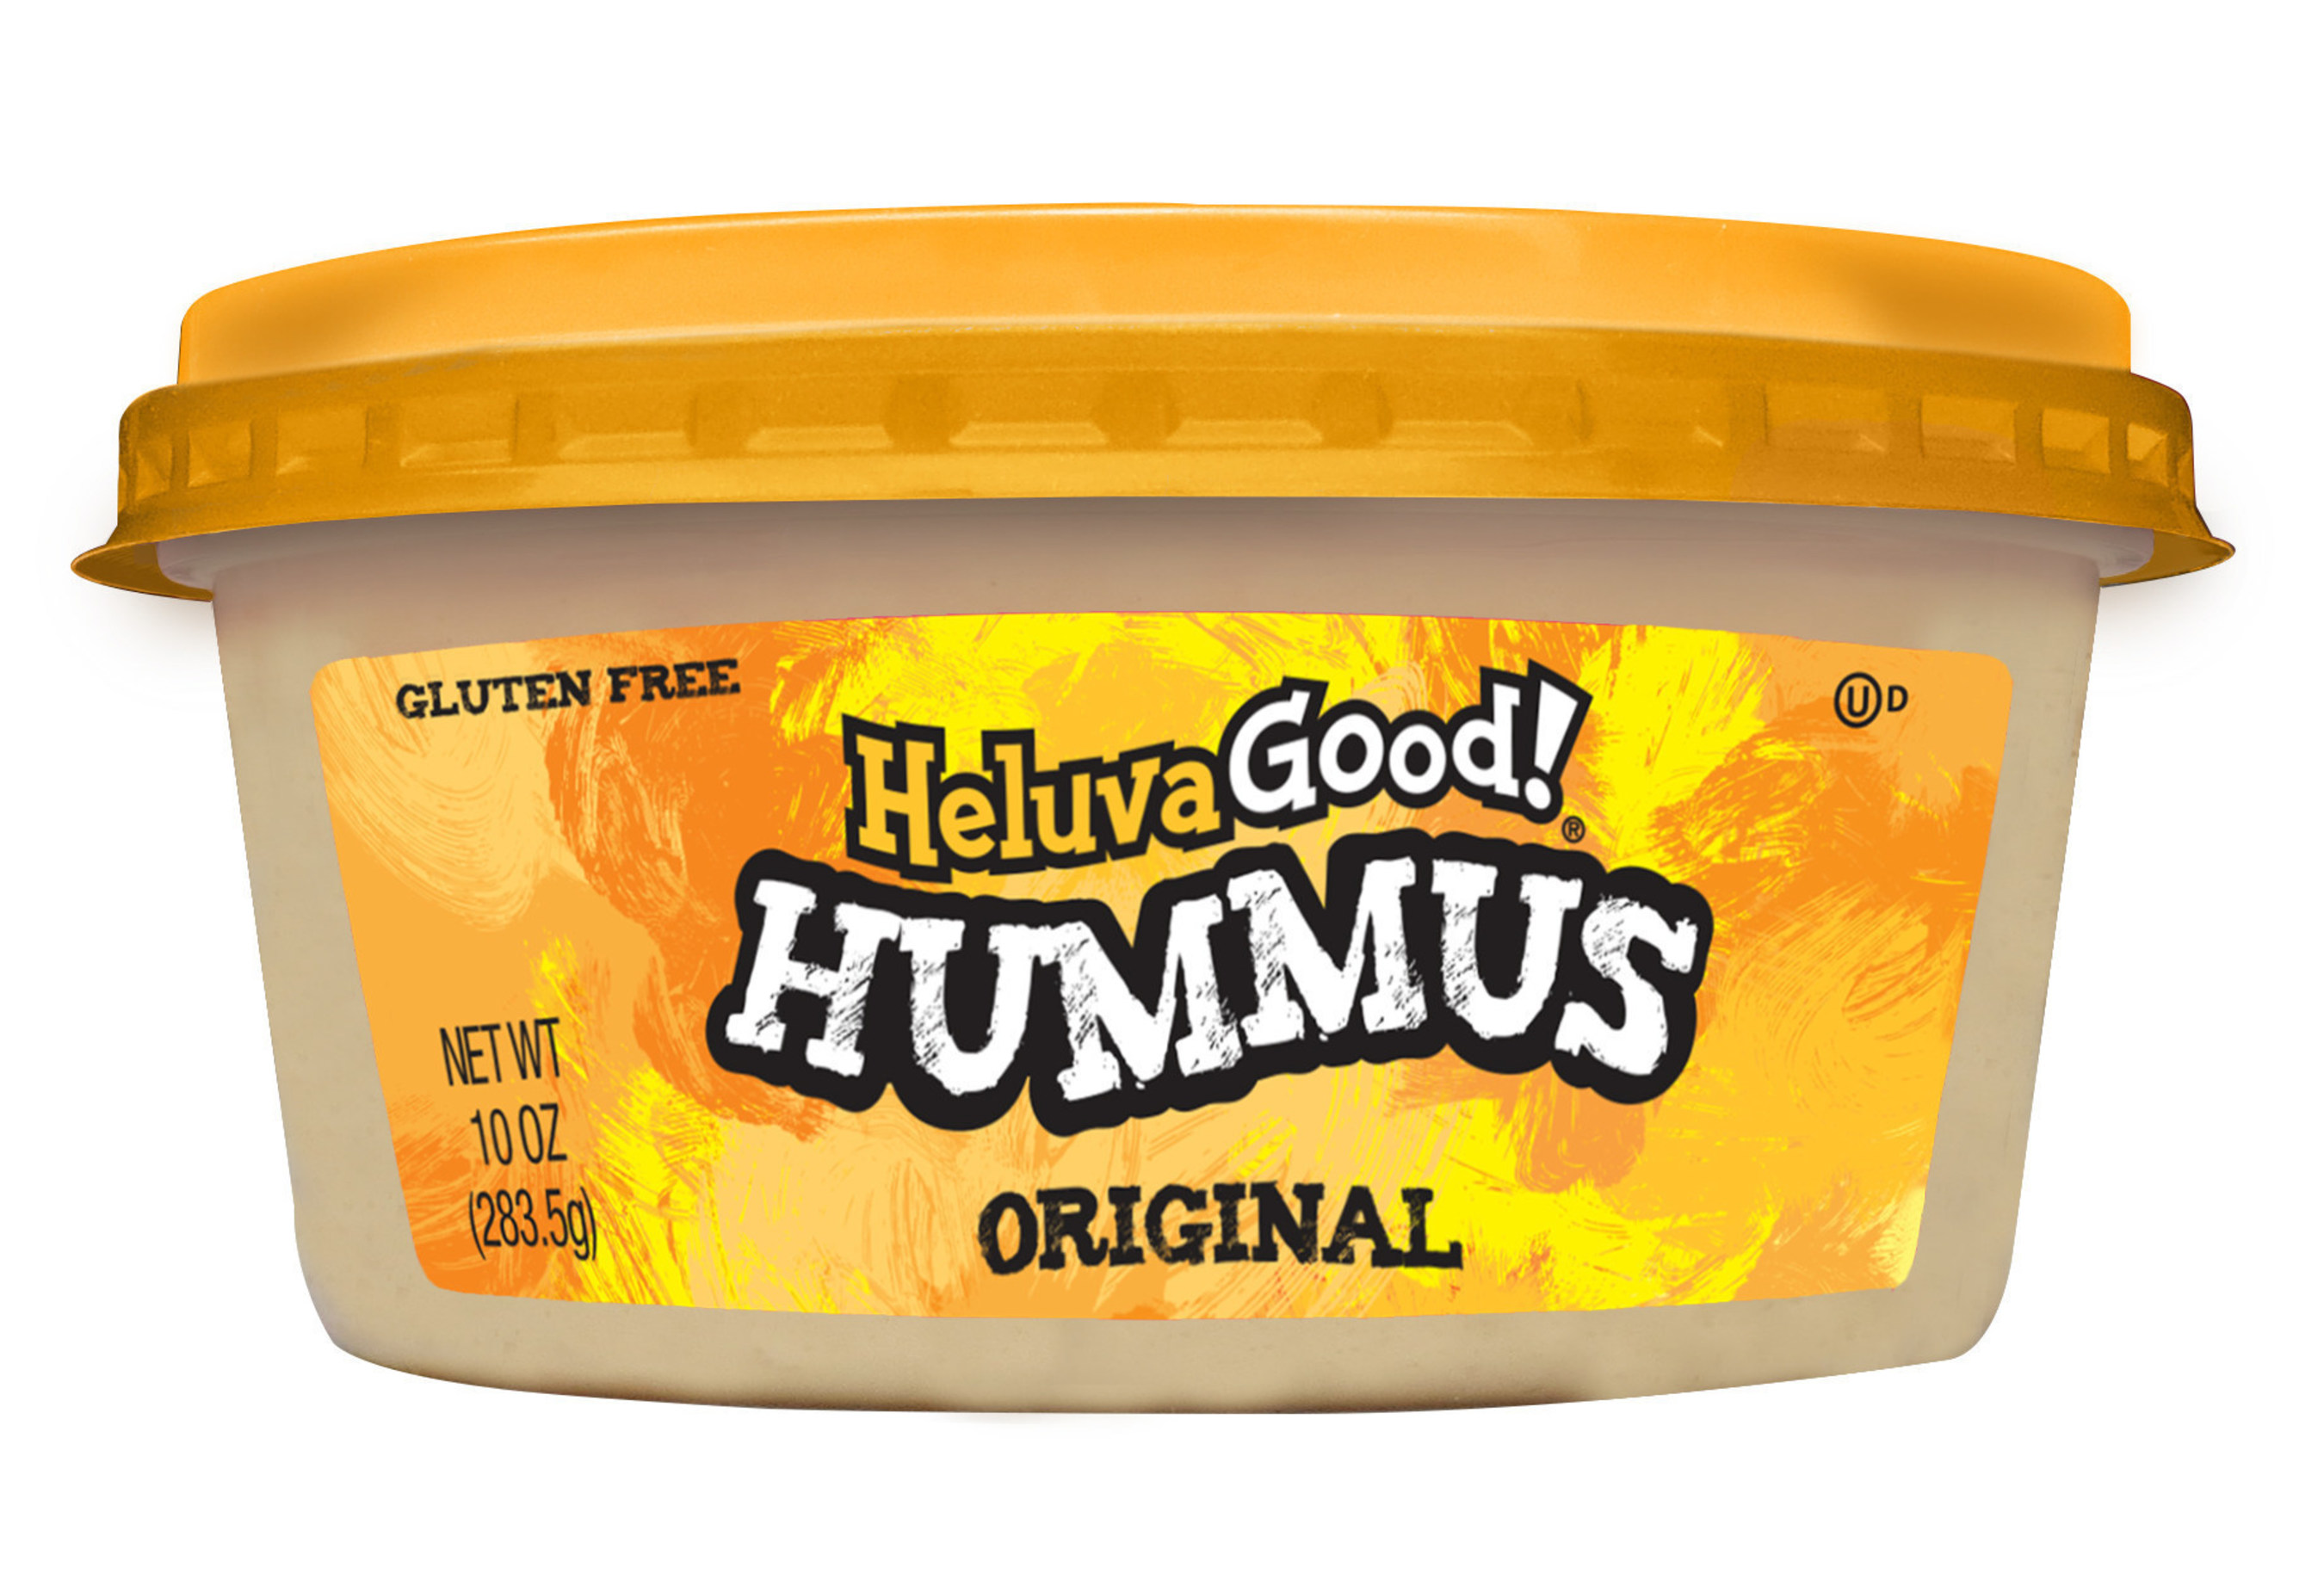 Heluva Good!(R) Hummus pairs perfectly with your favorite pita chips for the ultimate snacking experience.